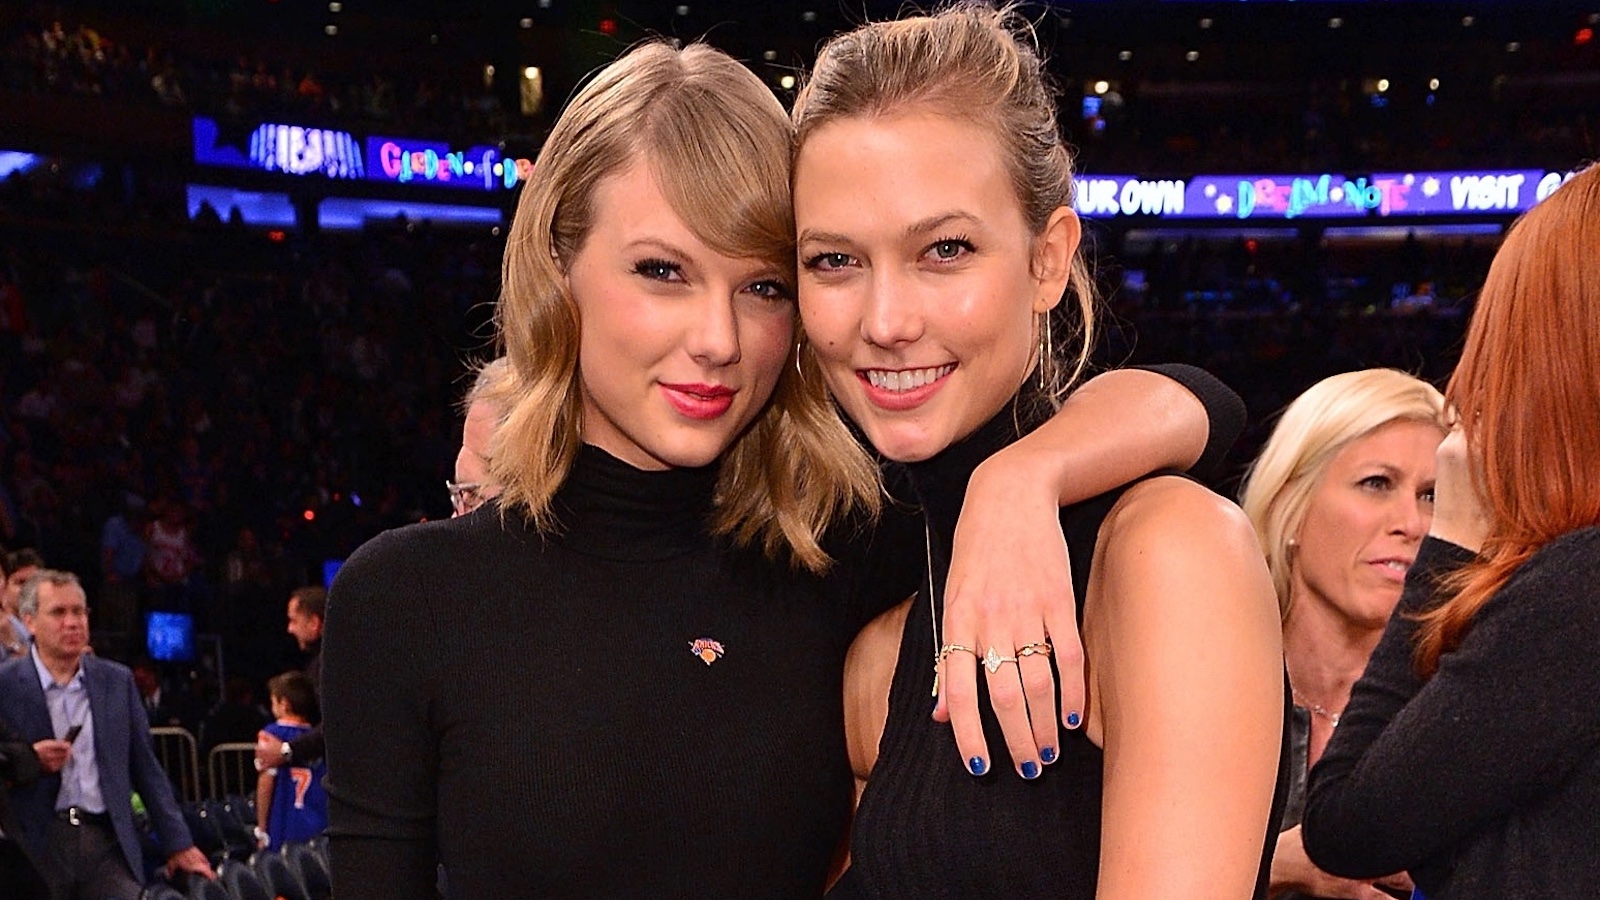 What Happened Between Karlie Kloss And Taylor Swift